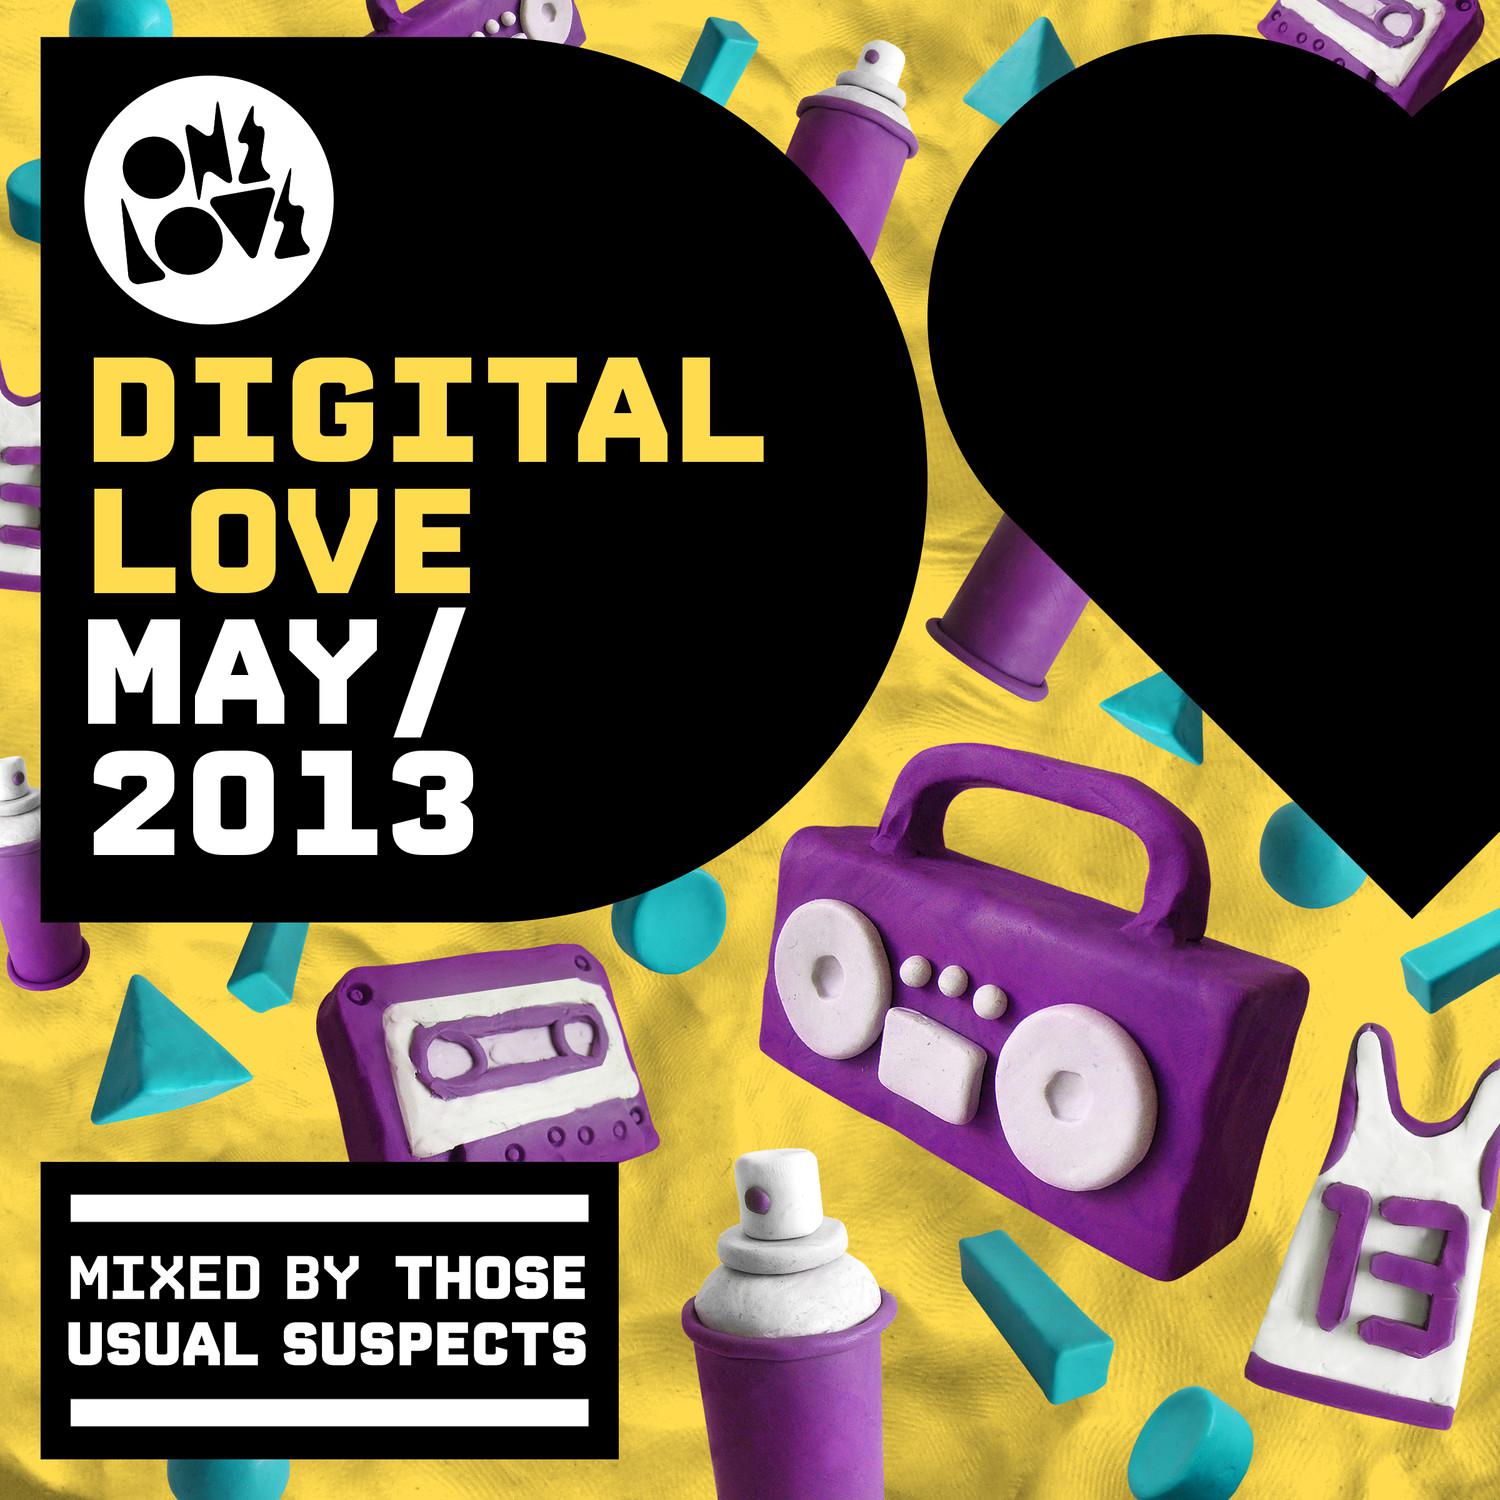 Onelove Digital Love May 2013 (Mixed by Those Usual Suspects)